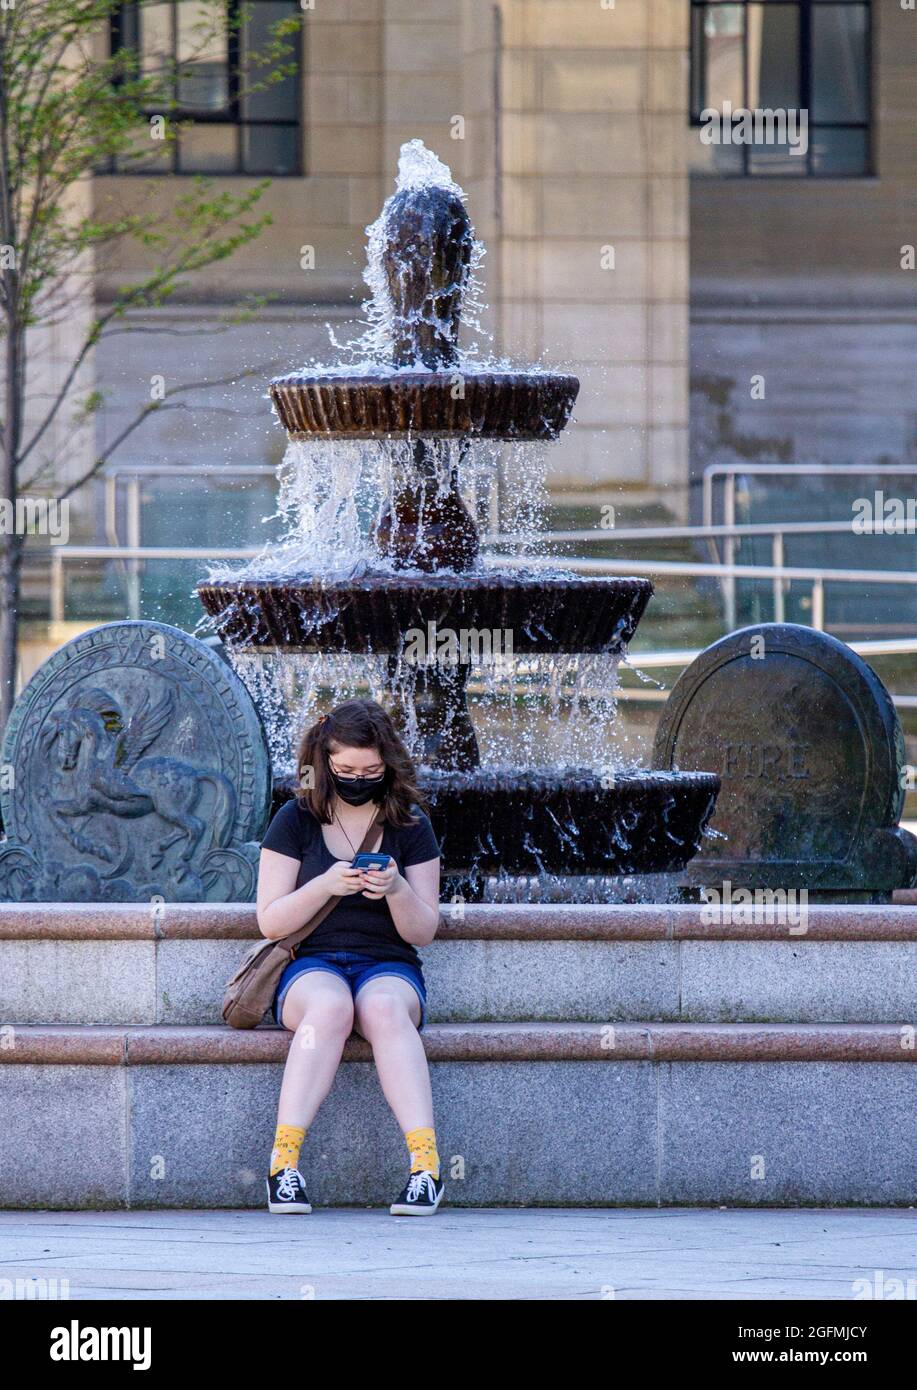 Dundee, Tayside, Scotland, UK. 26th Aug, 2021. UK Weather: A warm sunny day with a slight cool breeze across North East Scotland with temperatures reaching 20°C. A young glamorous woman wearing a facemask sitting beside the Caird Hall fountains cooling off from the warm sunshine whilst texting messages on her I Phone in Dundee city centre. Credit: Dundee Photographics/Alamy Live News Stock Photo